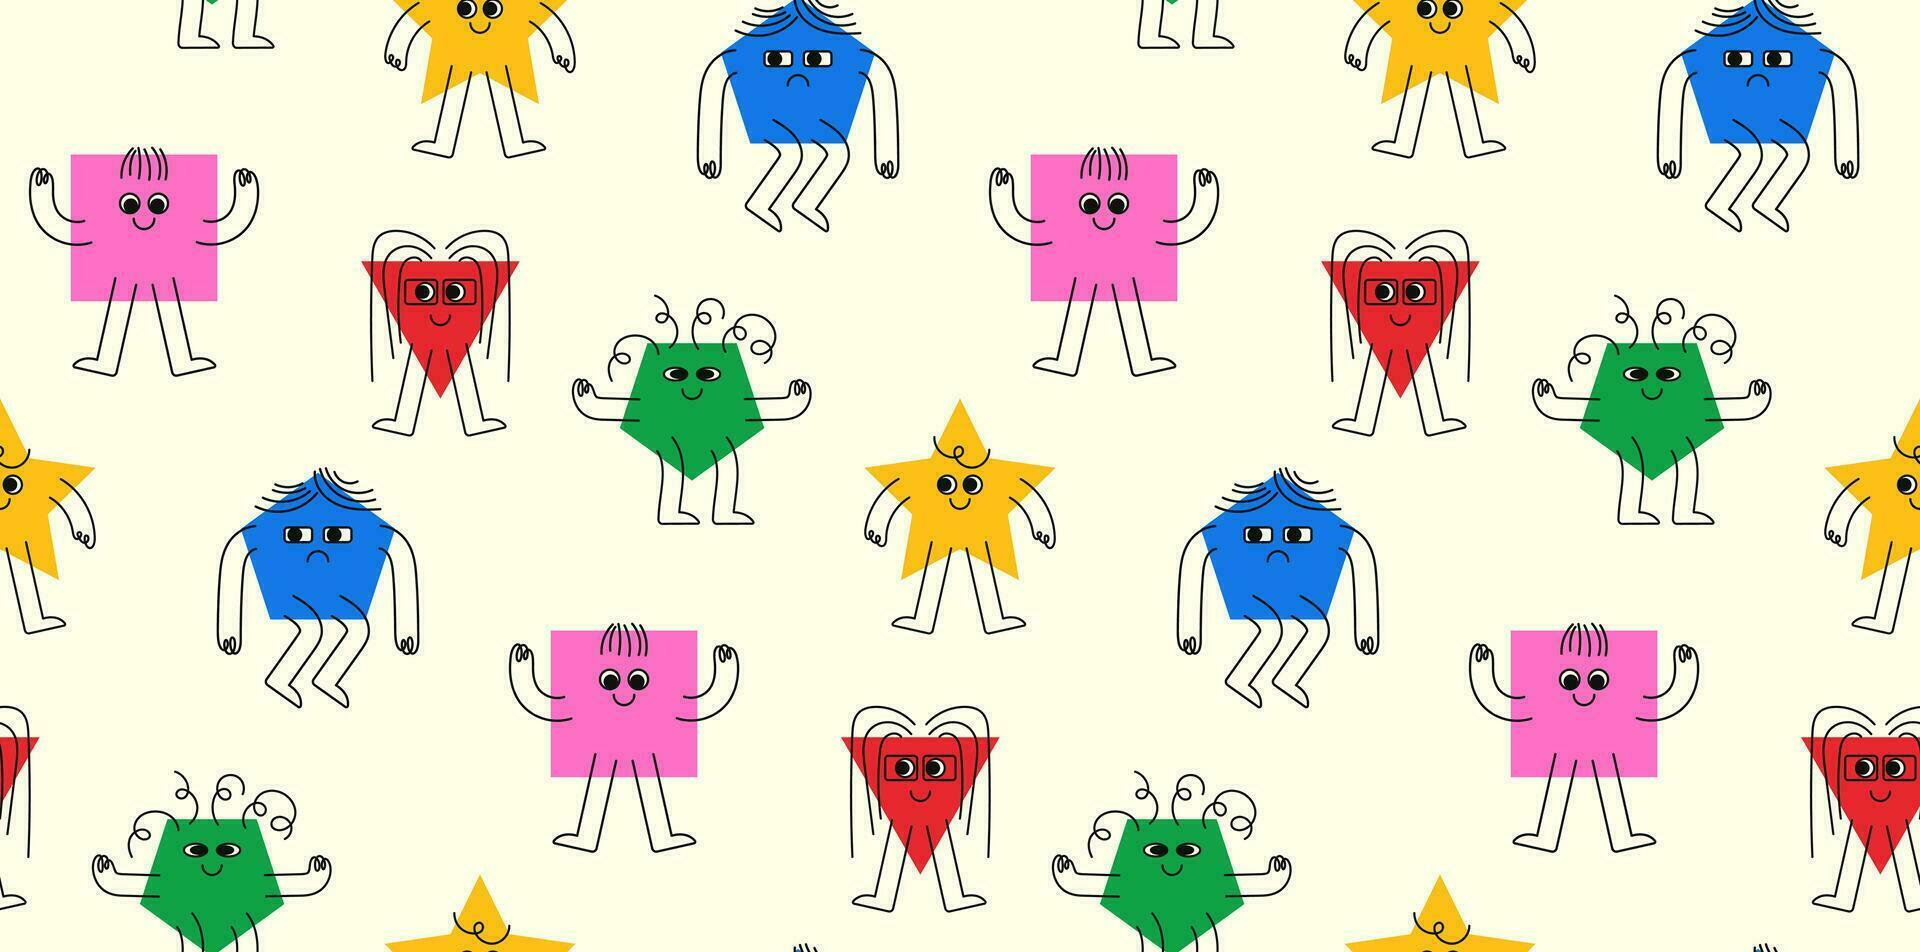 Colorful seamless background with cute geometric shapes in flat cartoon style. Fun triangle, square, pentagon and star characters with cute faces, arms and legs. vector